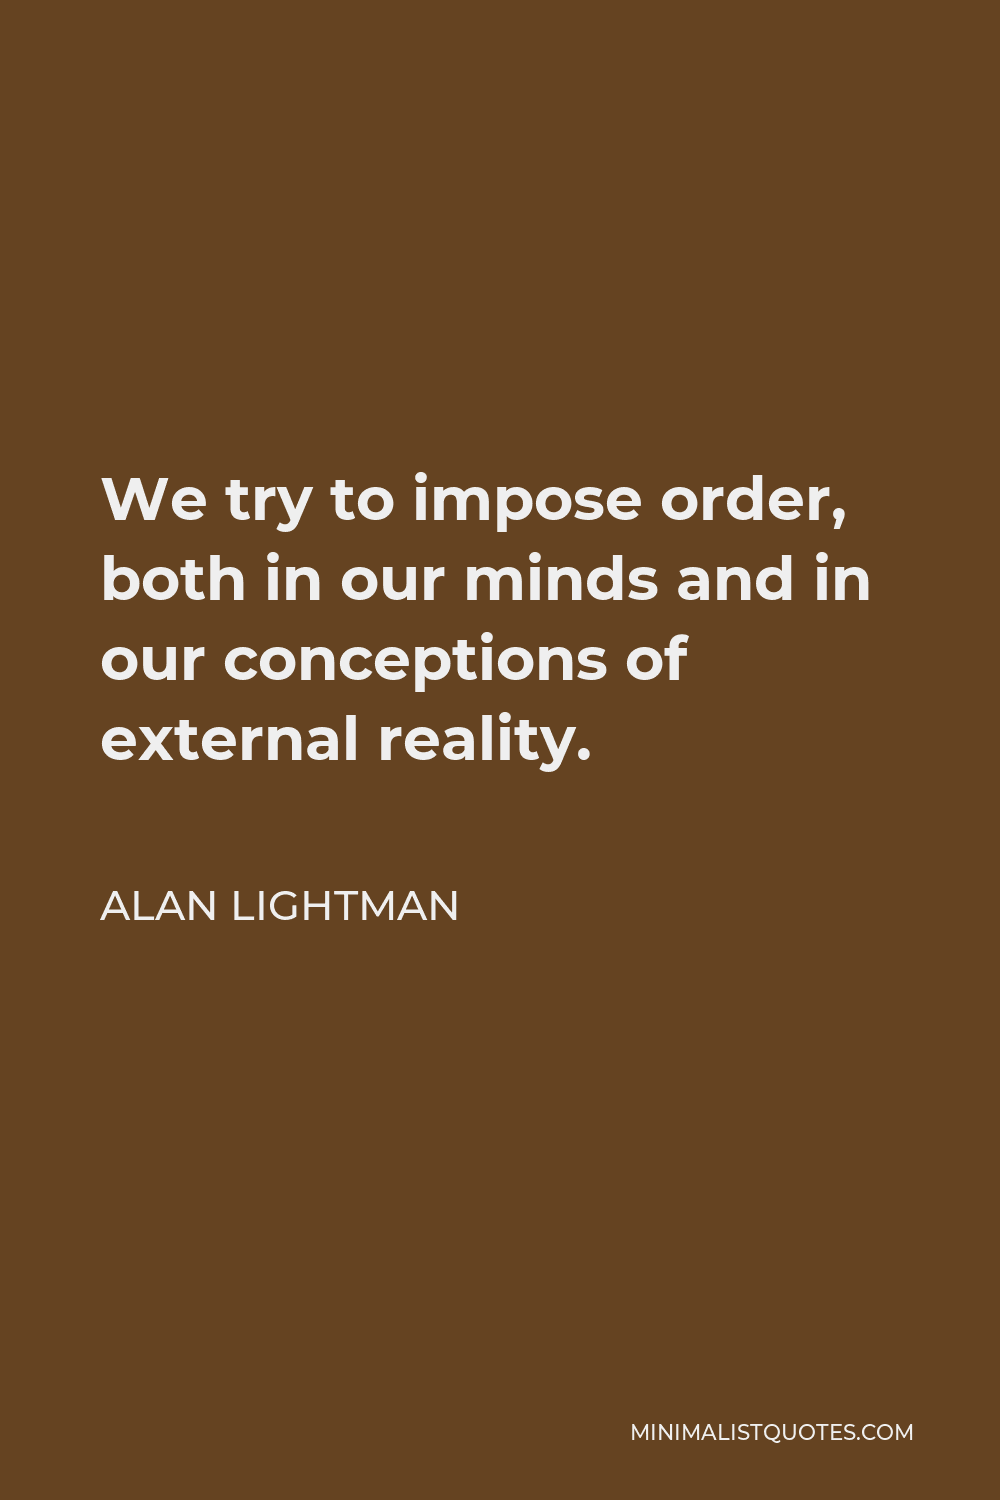 Alan Lightman Quote - We try to impose order, both in our minds and in our conceptions of external reality.